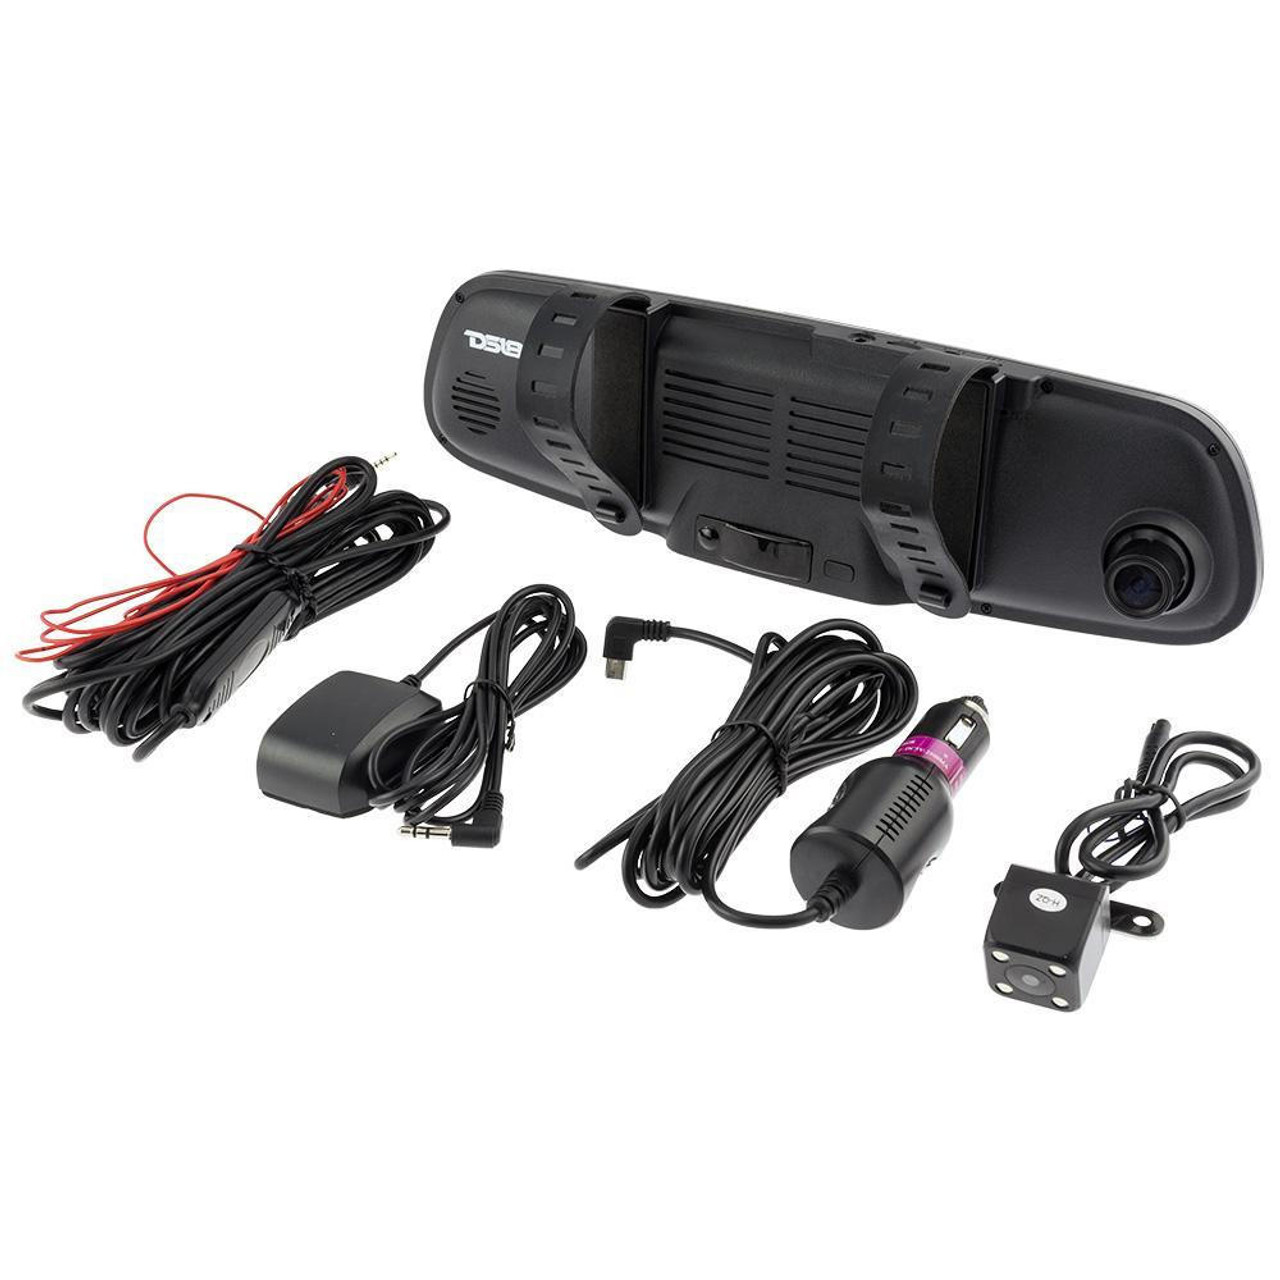 10 Full touch screen dash cams Android rearview mirror 4 cameras